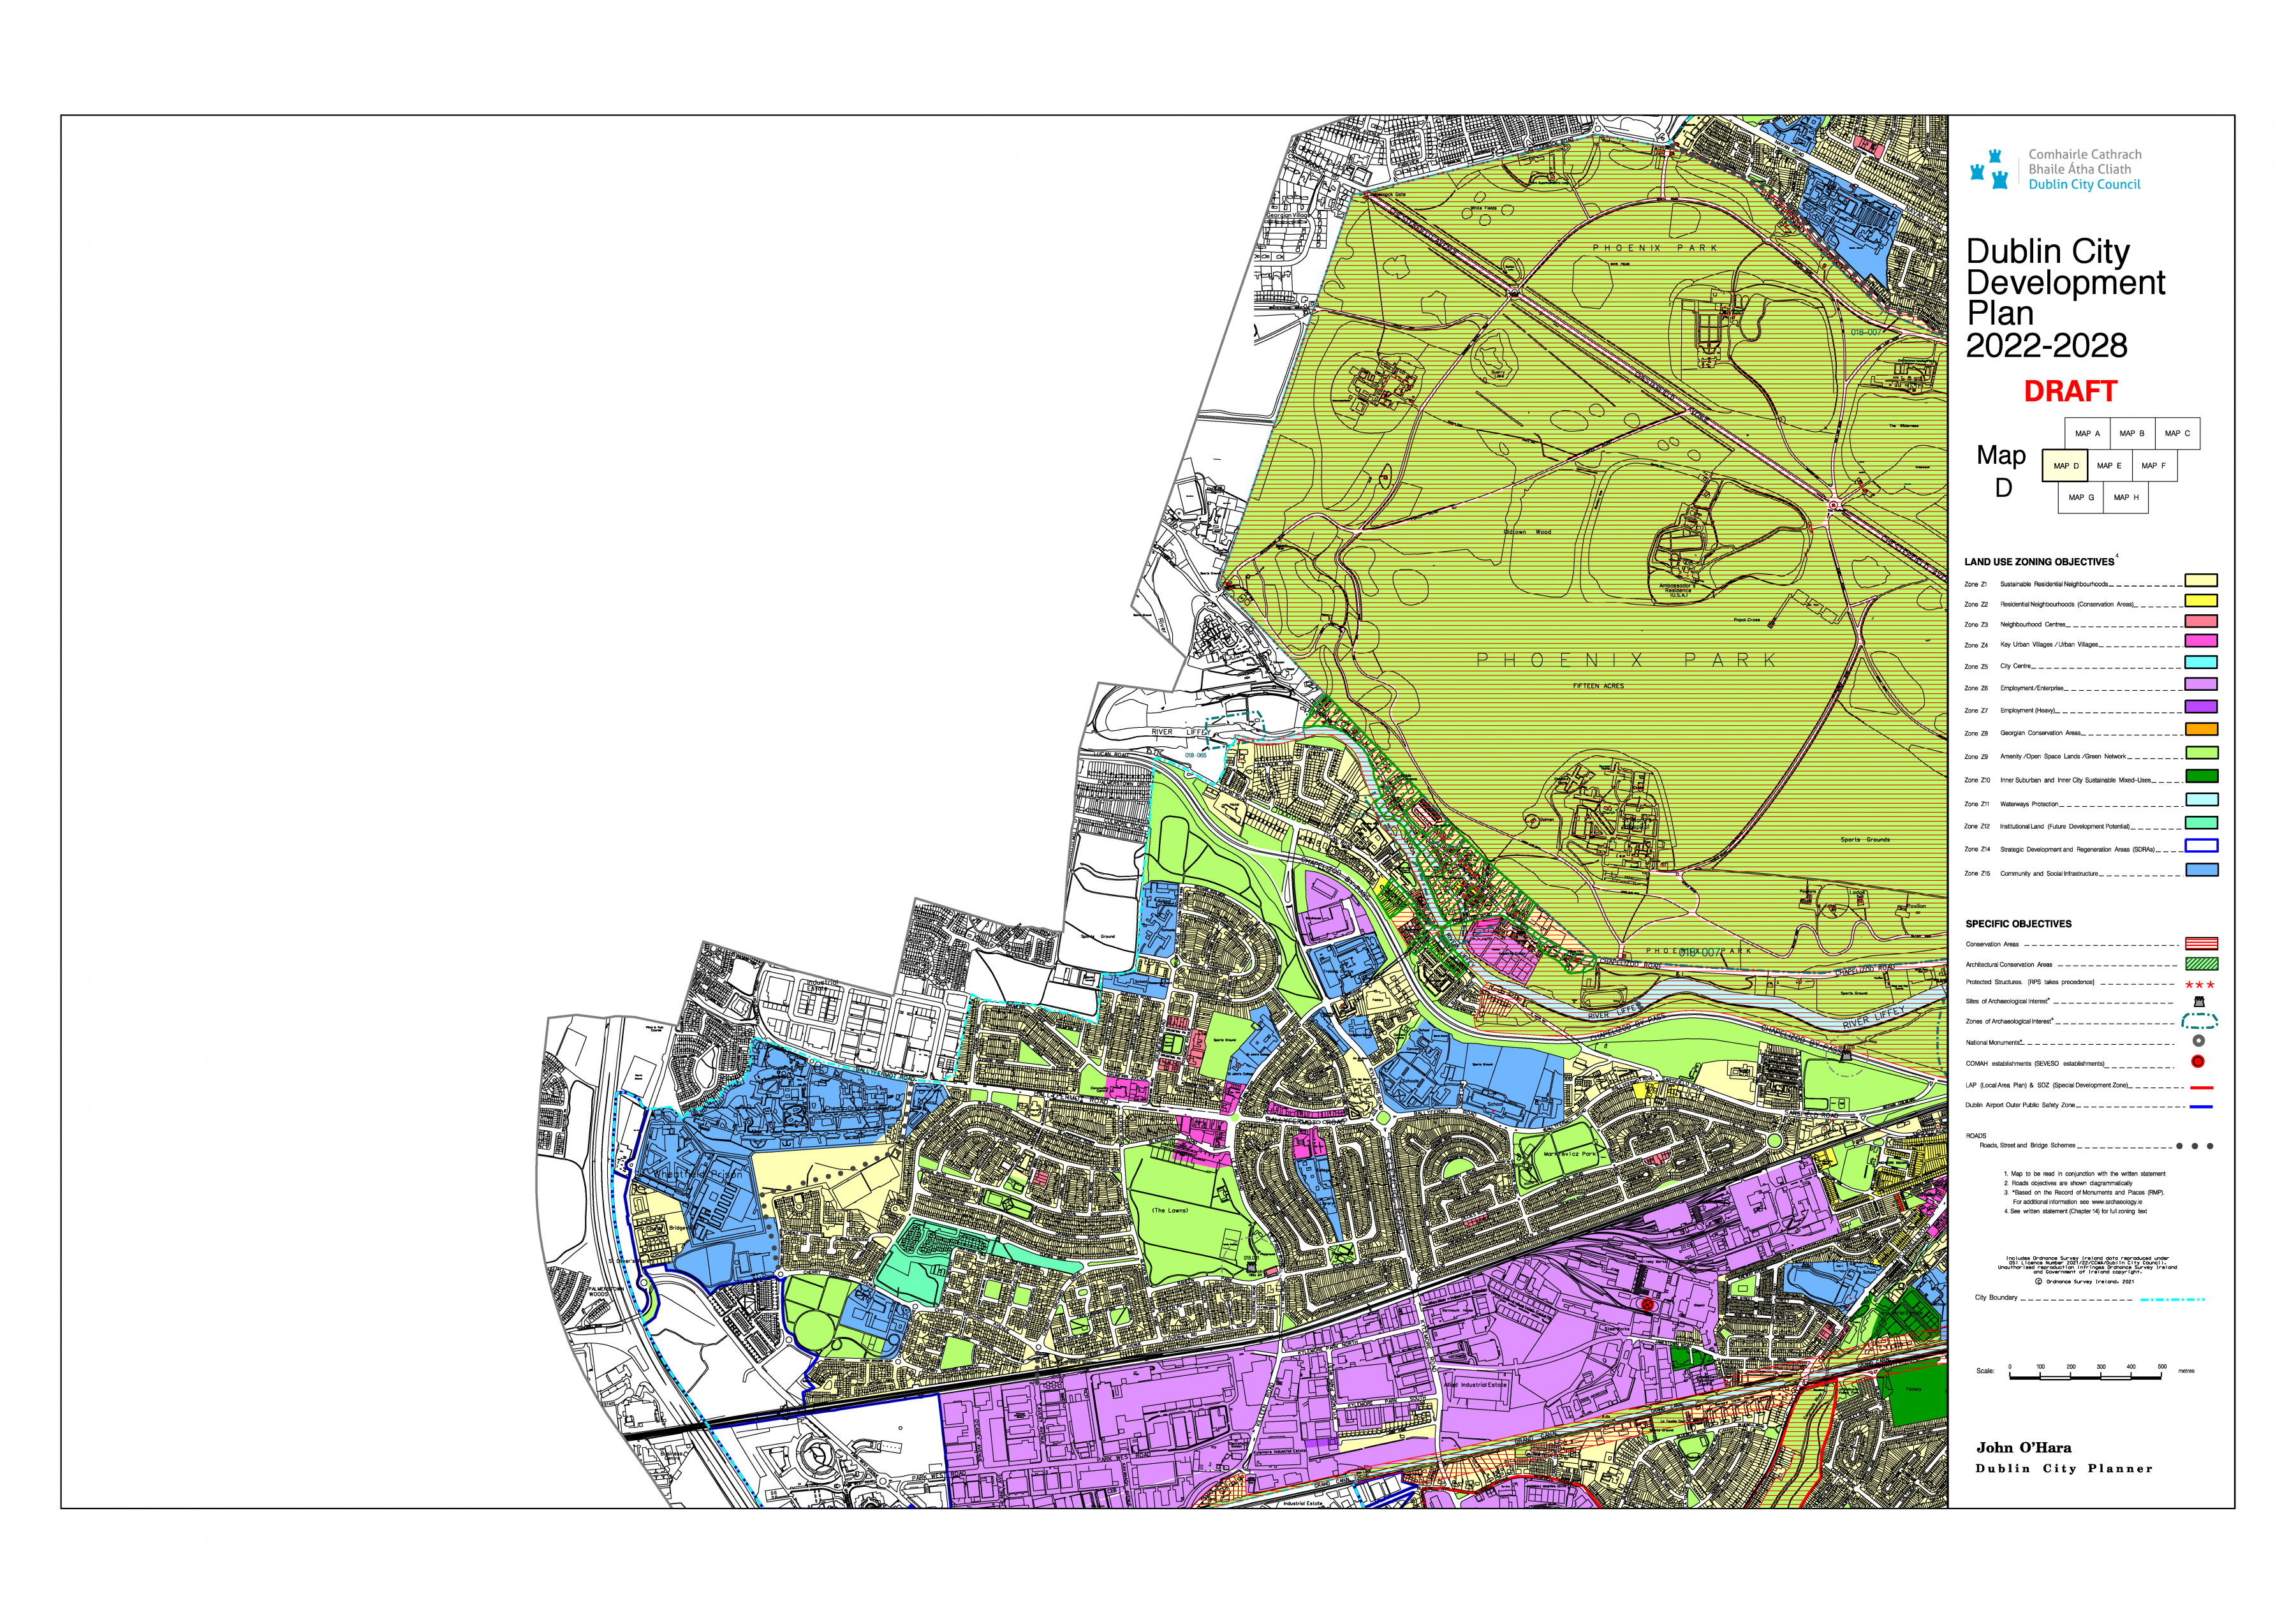 Map D Land Use Zoning Map